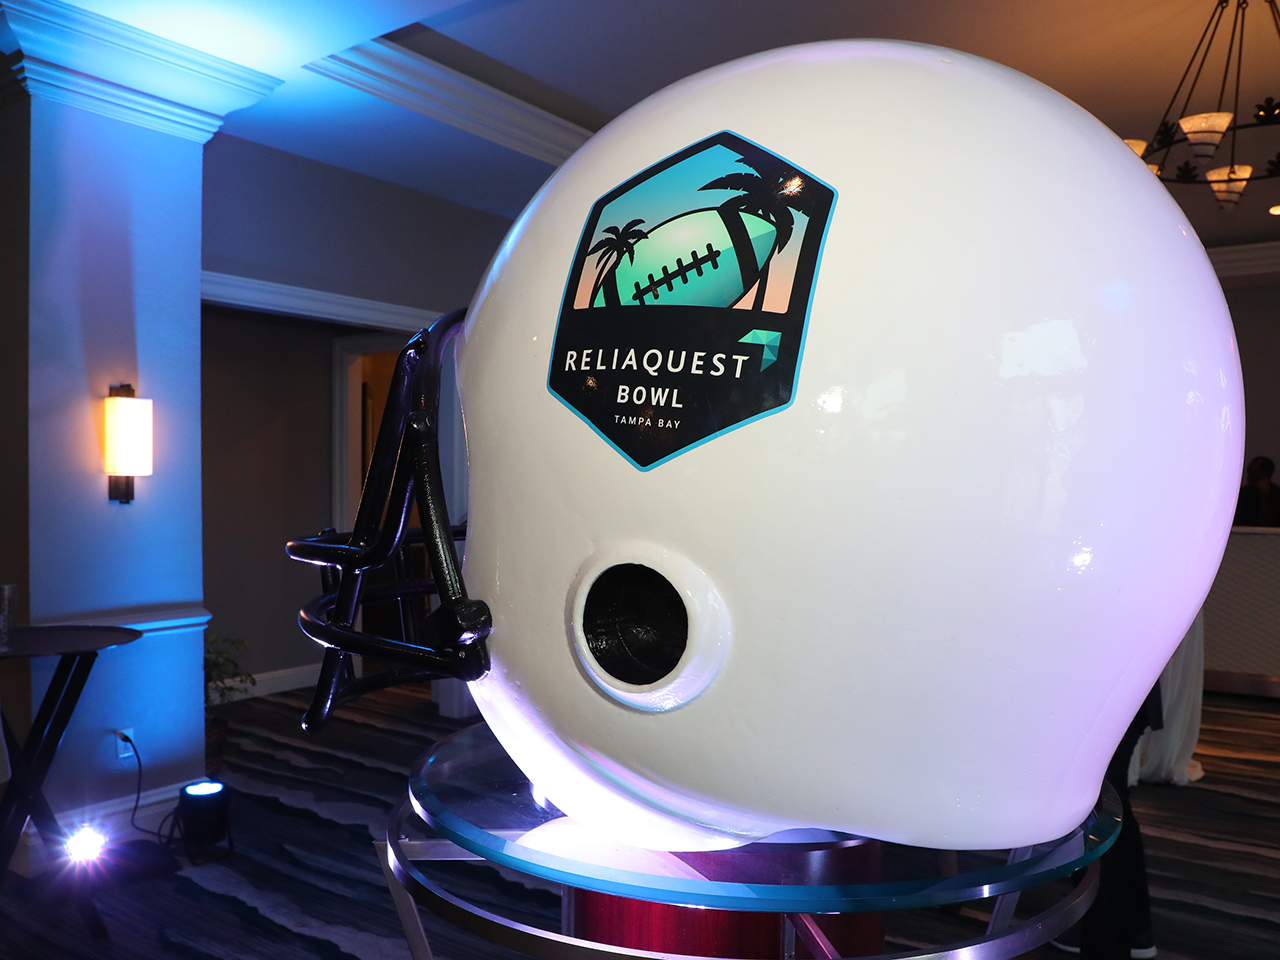 The centerpiece of the room was a giant helmet with the new bowl logo